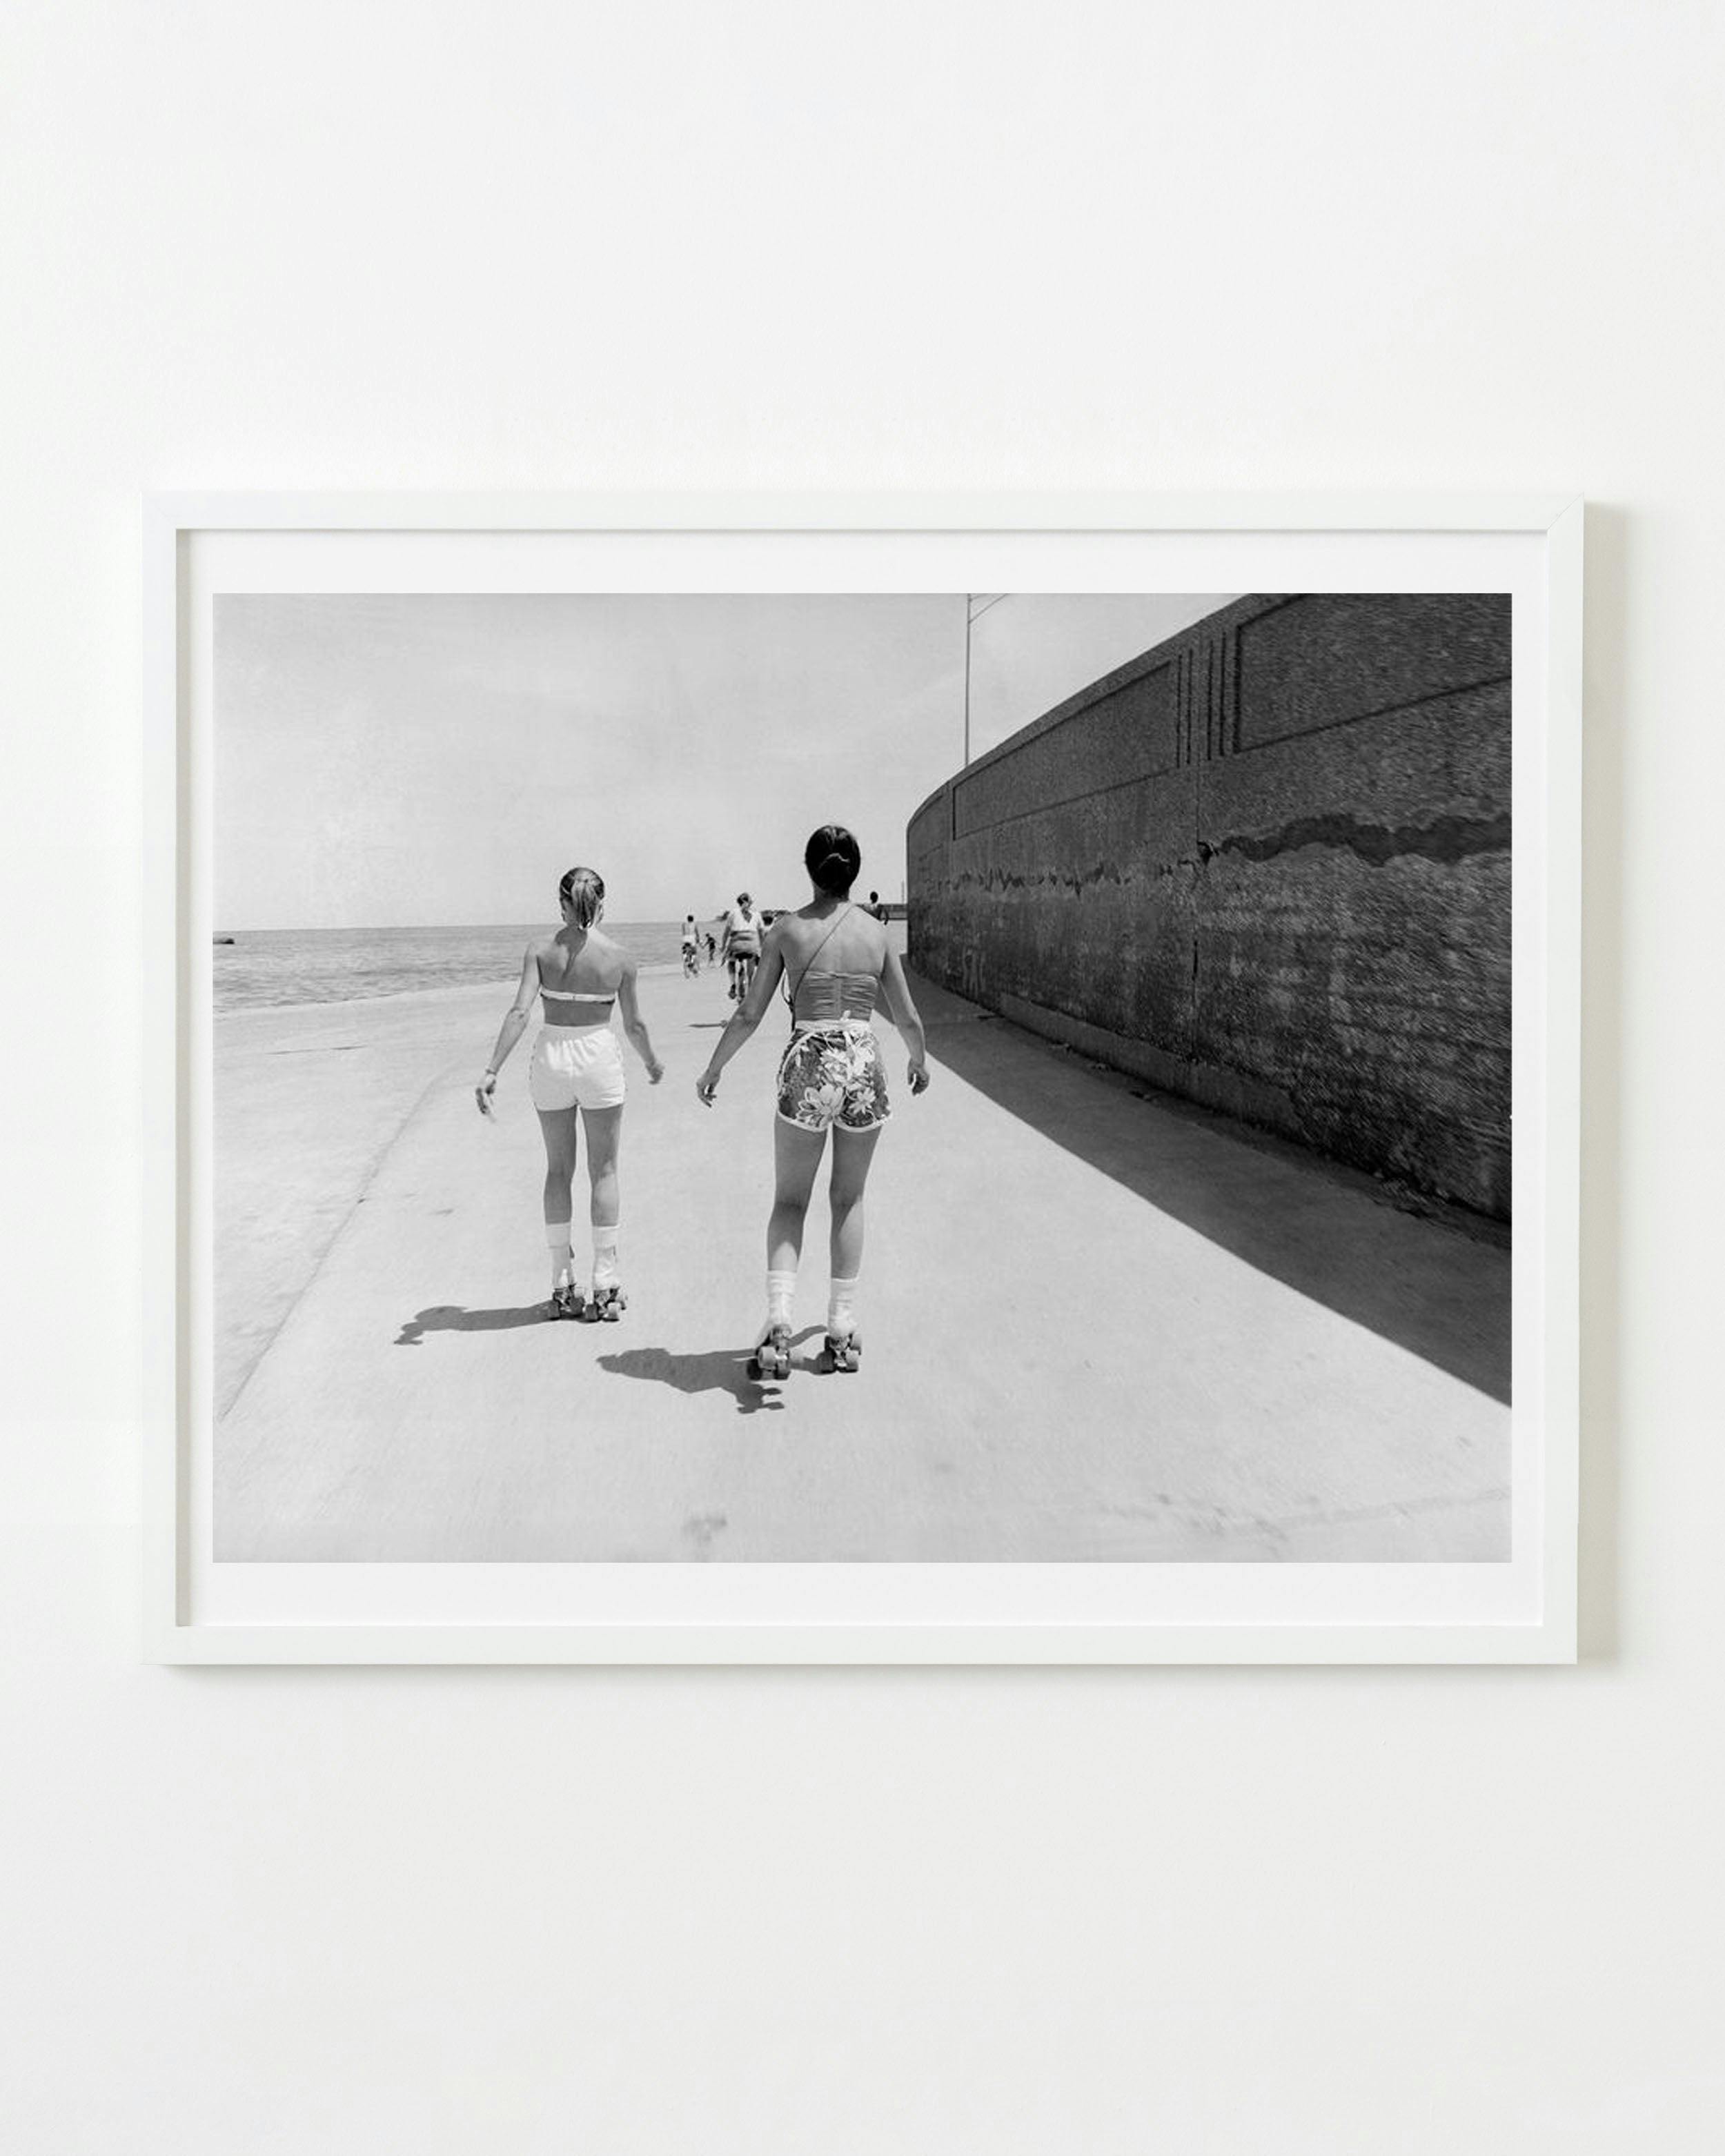 Photography by Michael Northrup titled "Lake Skaters".